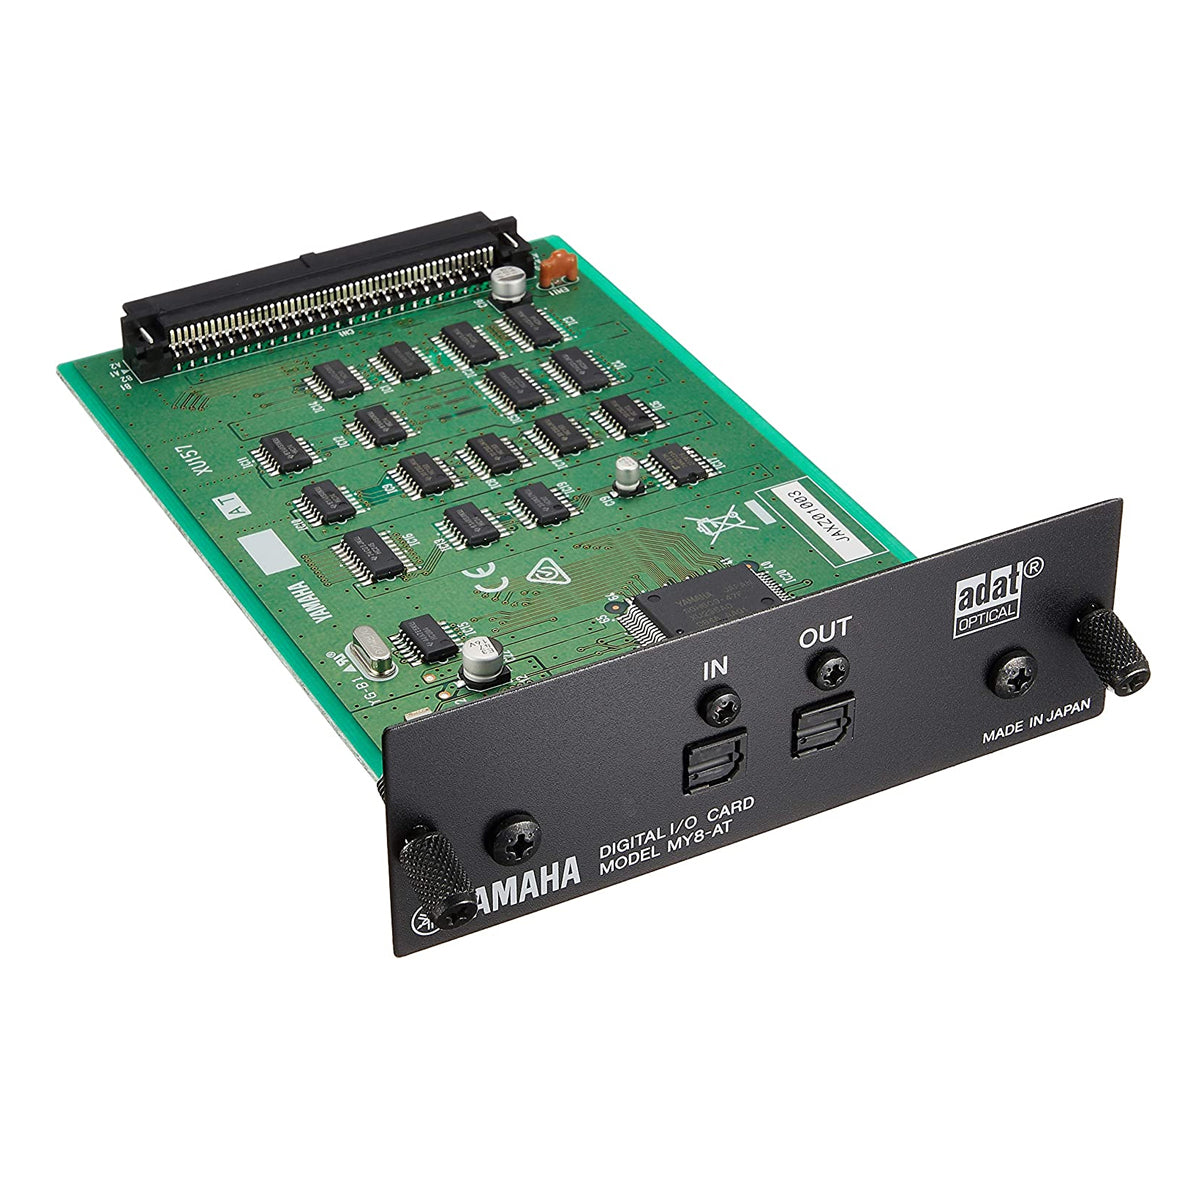 Yamaha ADAT 8 channel I/O card for O1V, D24, AW4416